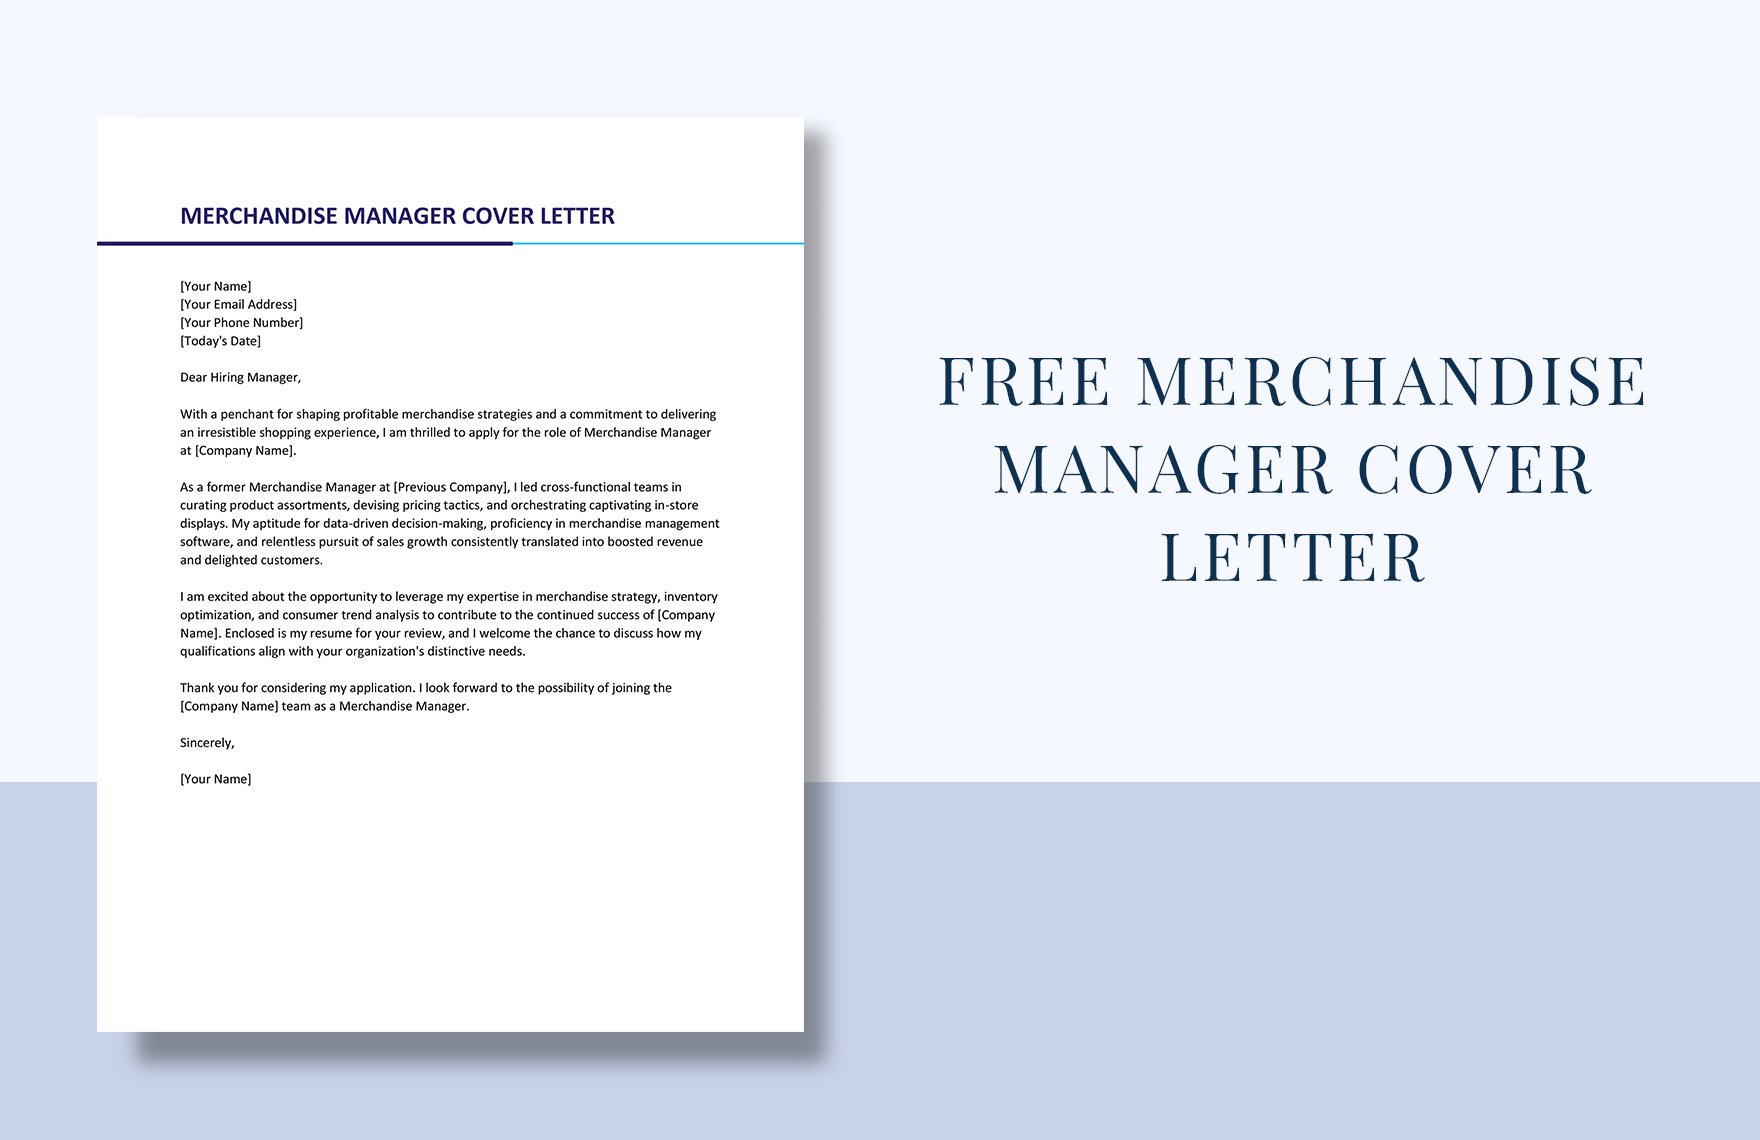 Merchandise Manager Cover Letter